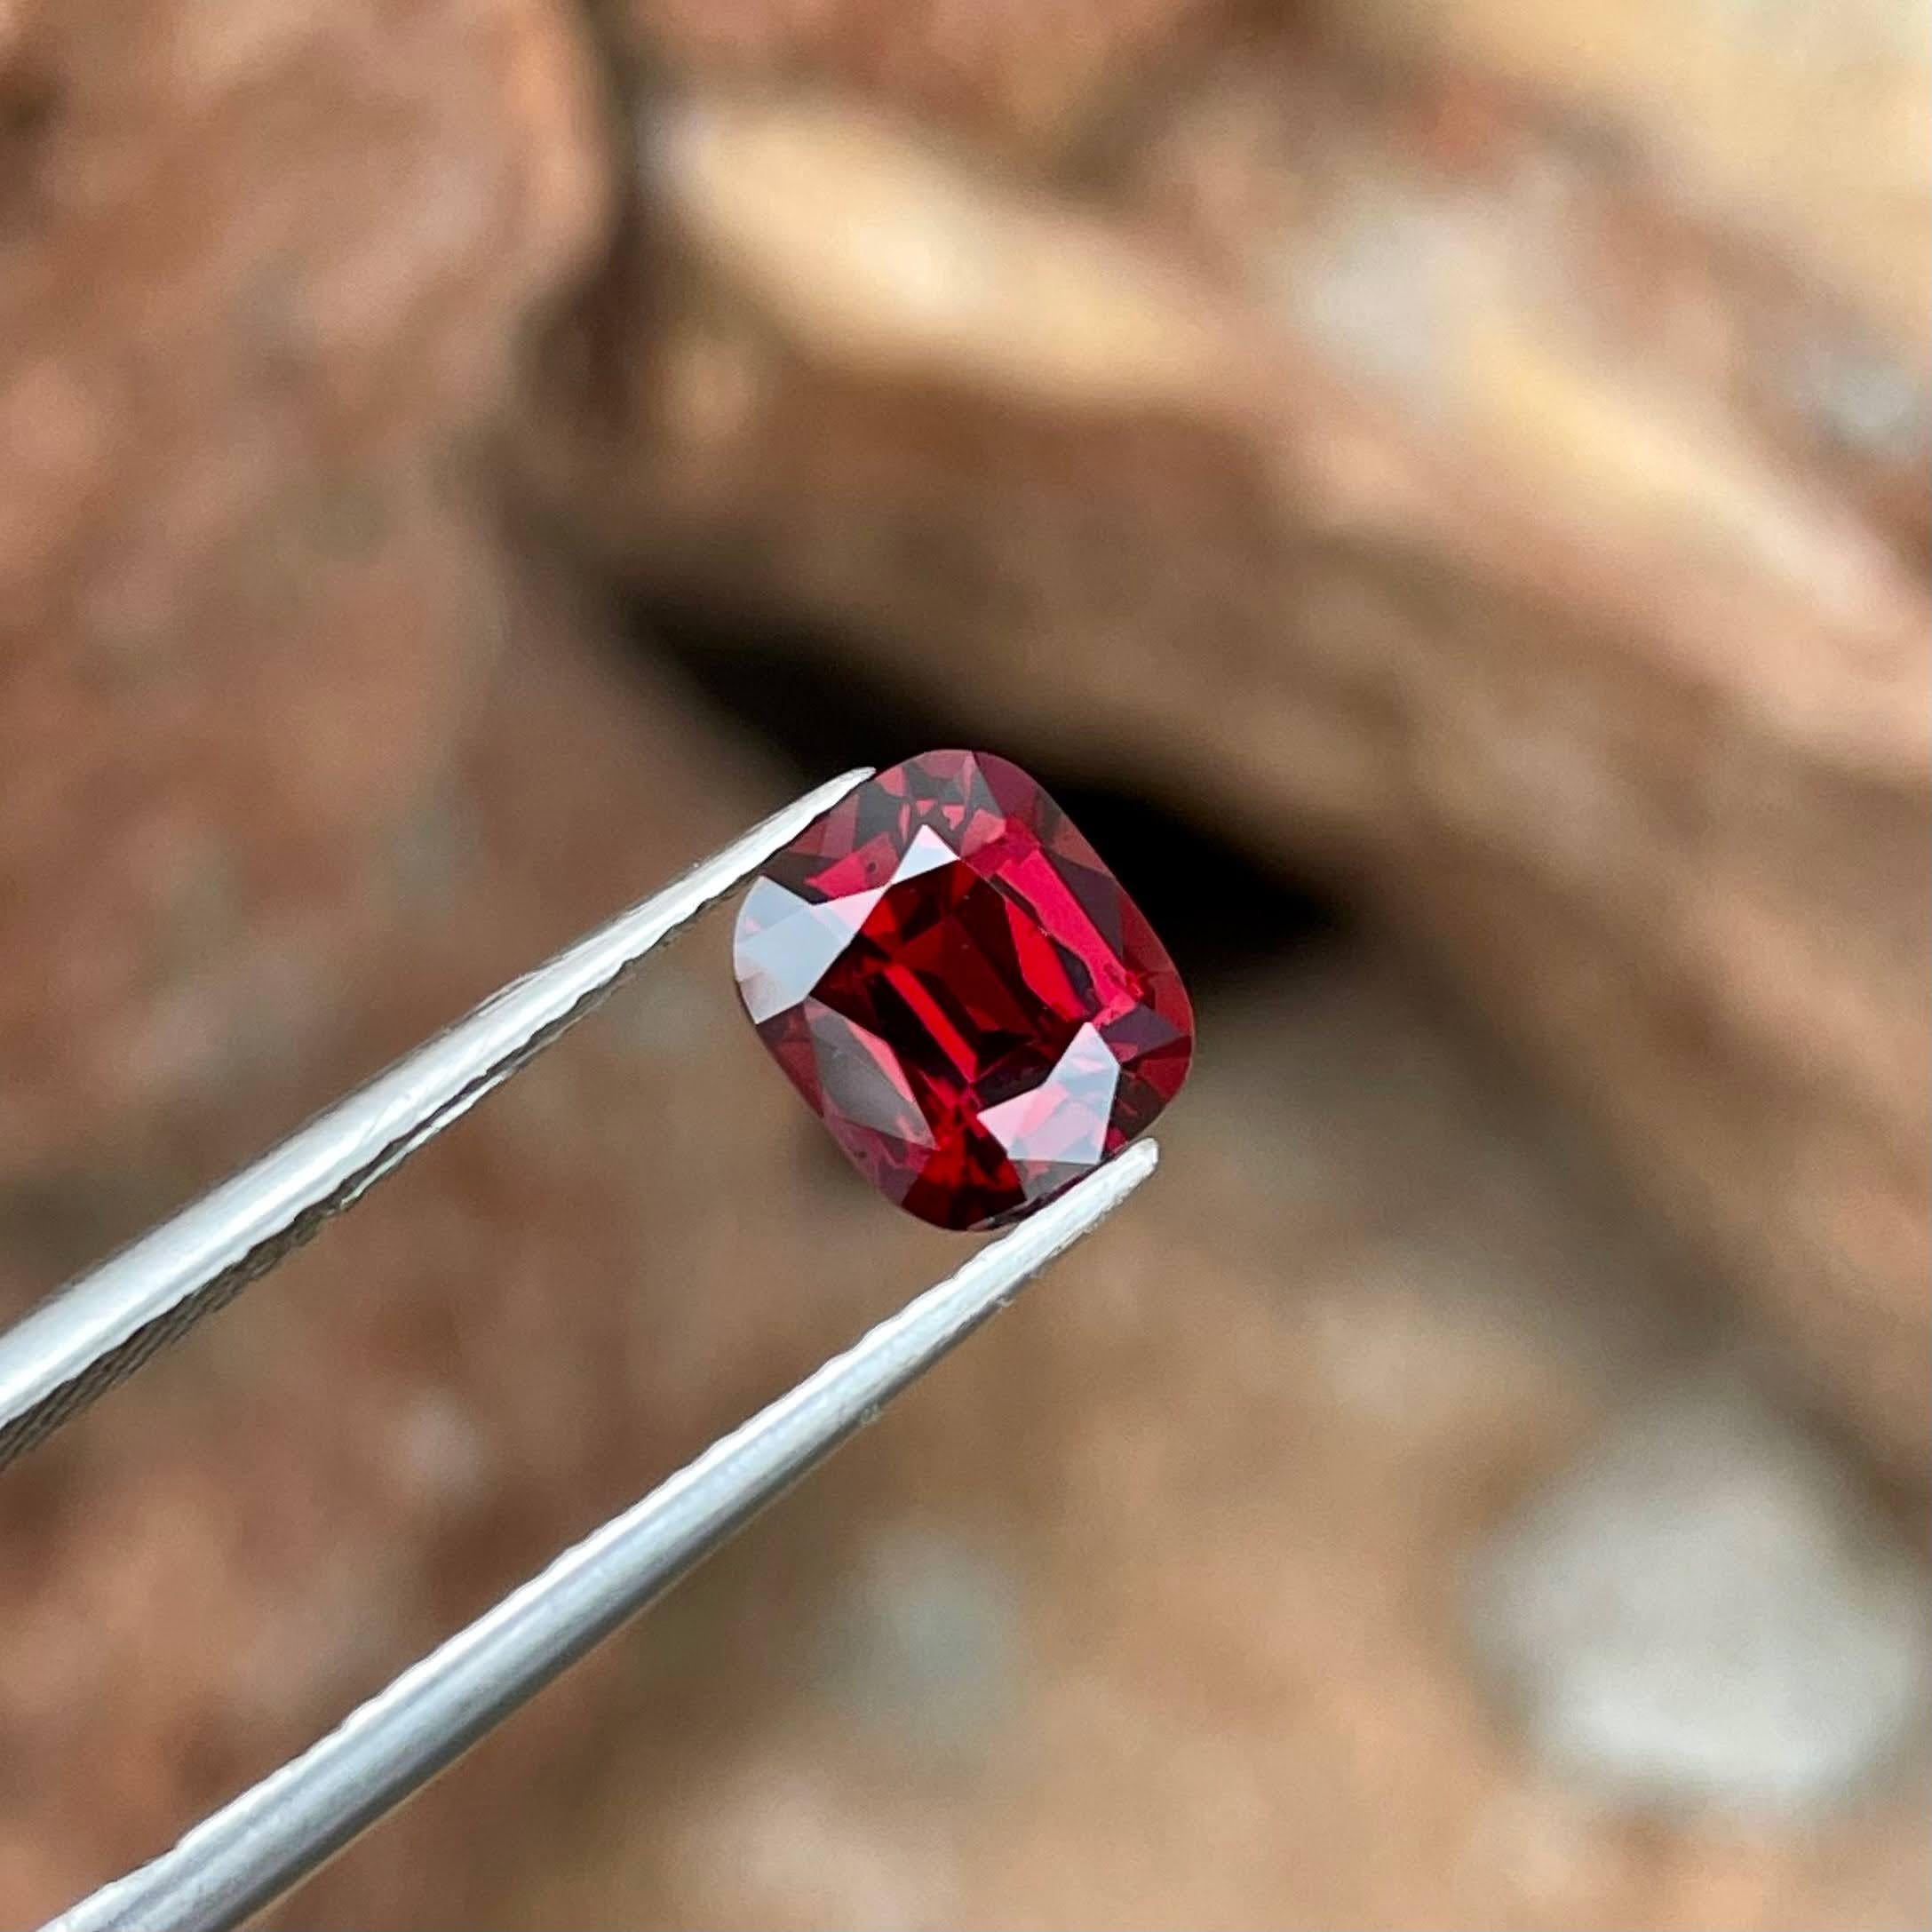 Weight 1.65 carats 
Dimensions 7.22x6.12x4.5 mm
Treatment none 
Origin Burma 
Clarity eye clean 
Shape cushion 
Cut fancy cushion 





Behold the allure of this exquisite 1.65 carats Natural Red Burmese Spinel, a gemstone of unparalleled beauty and